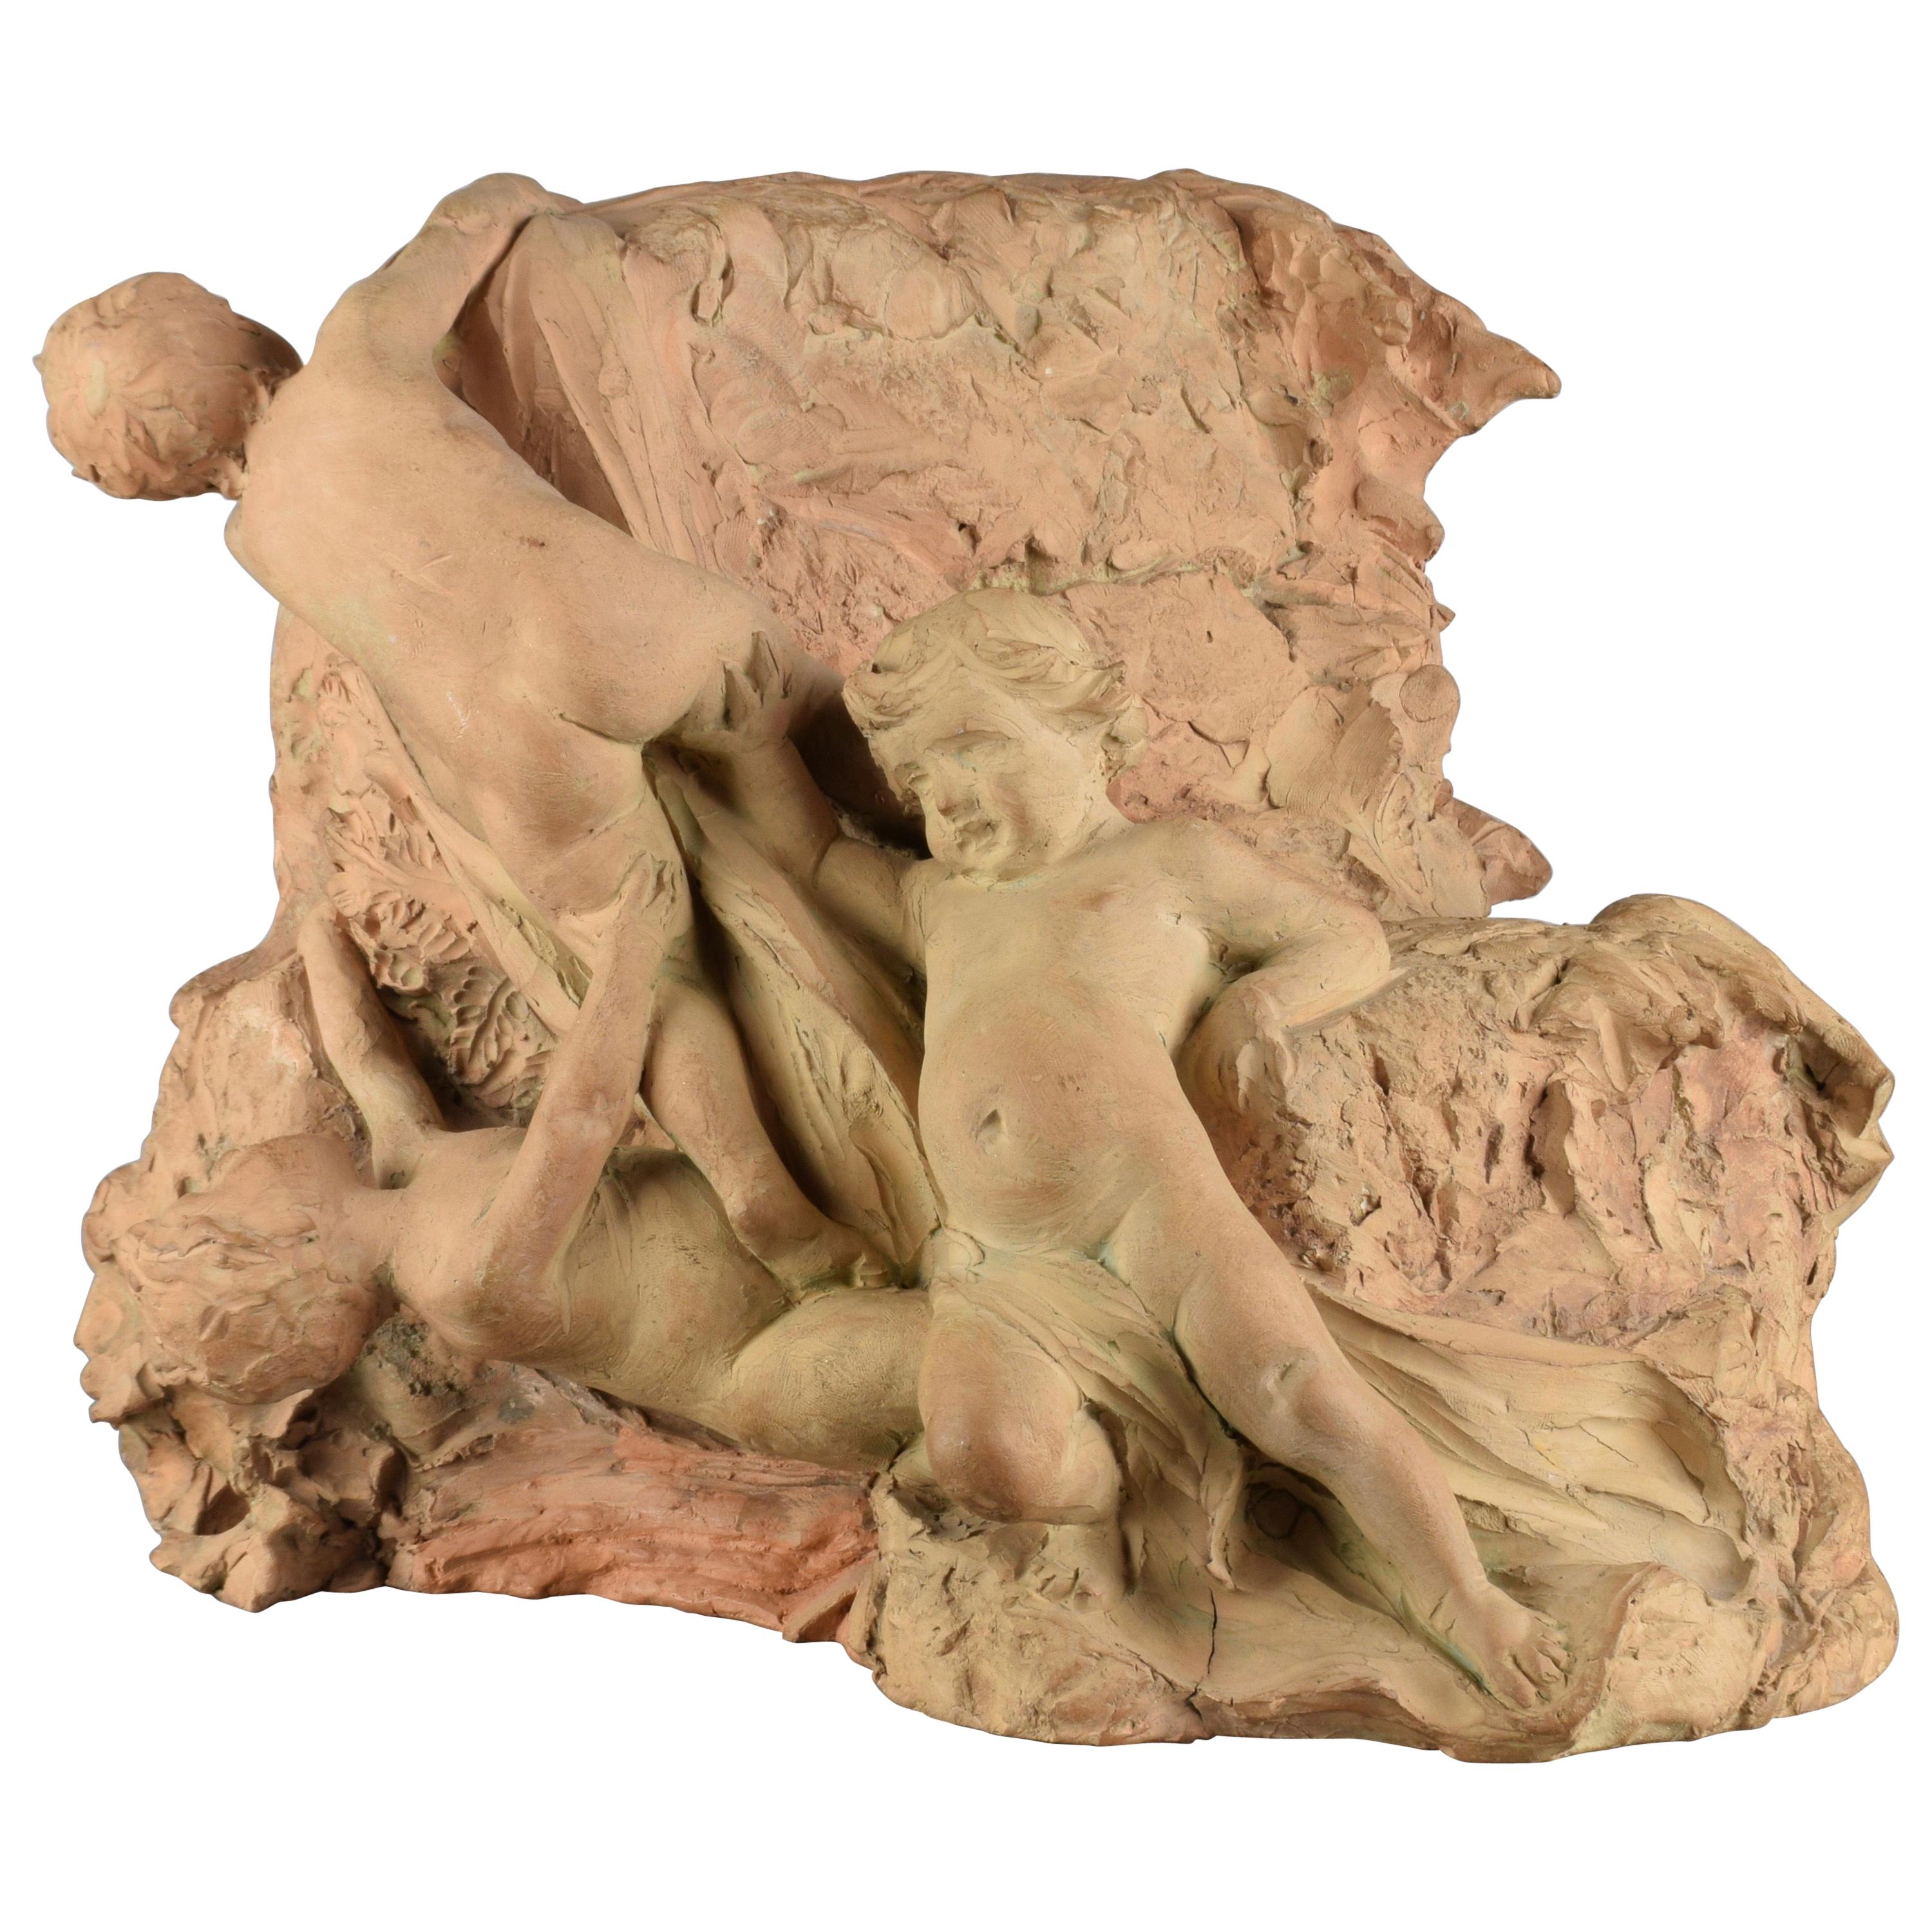 Finely Modeled Terracotta Capital with Cherubs, Late 19th Century